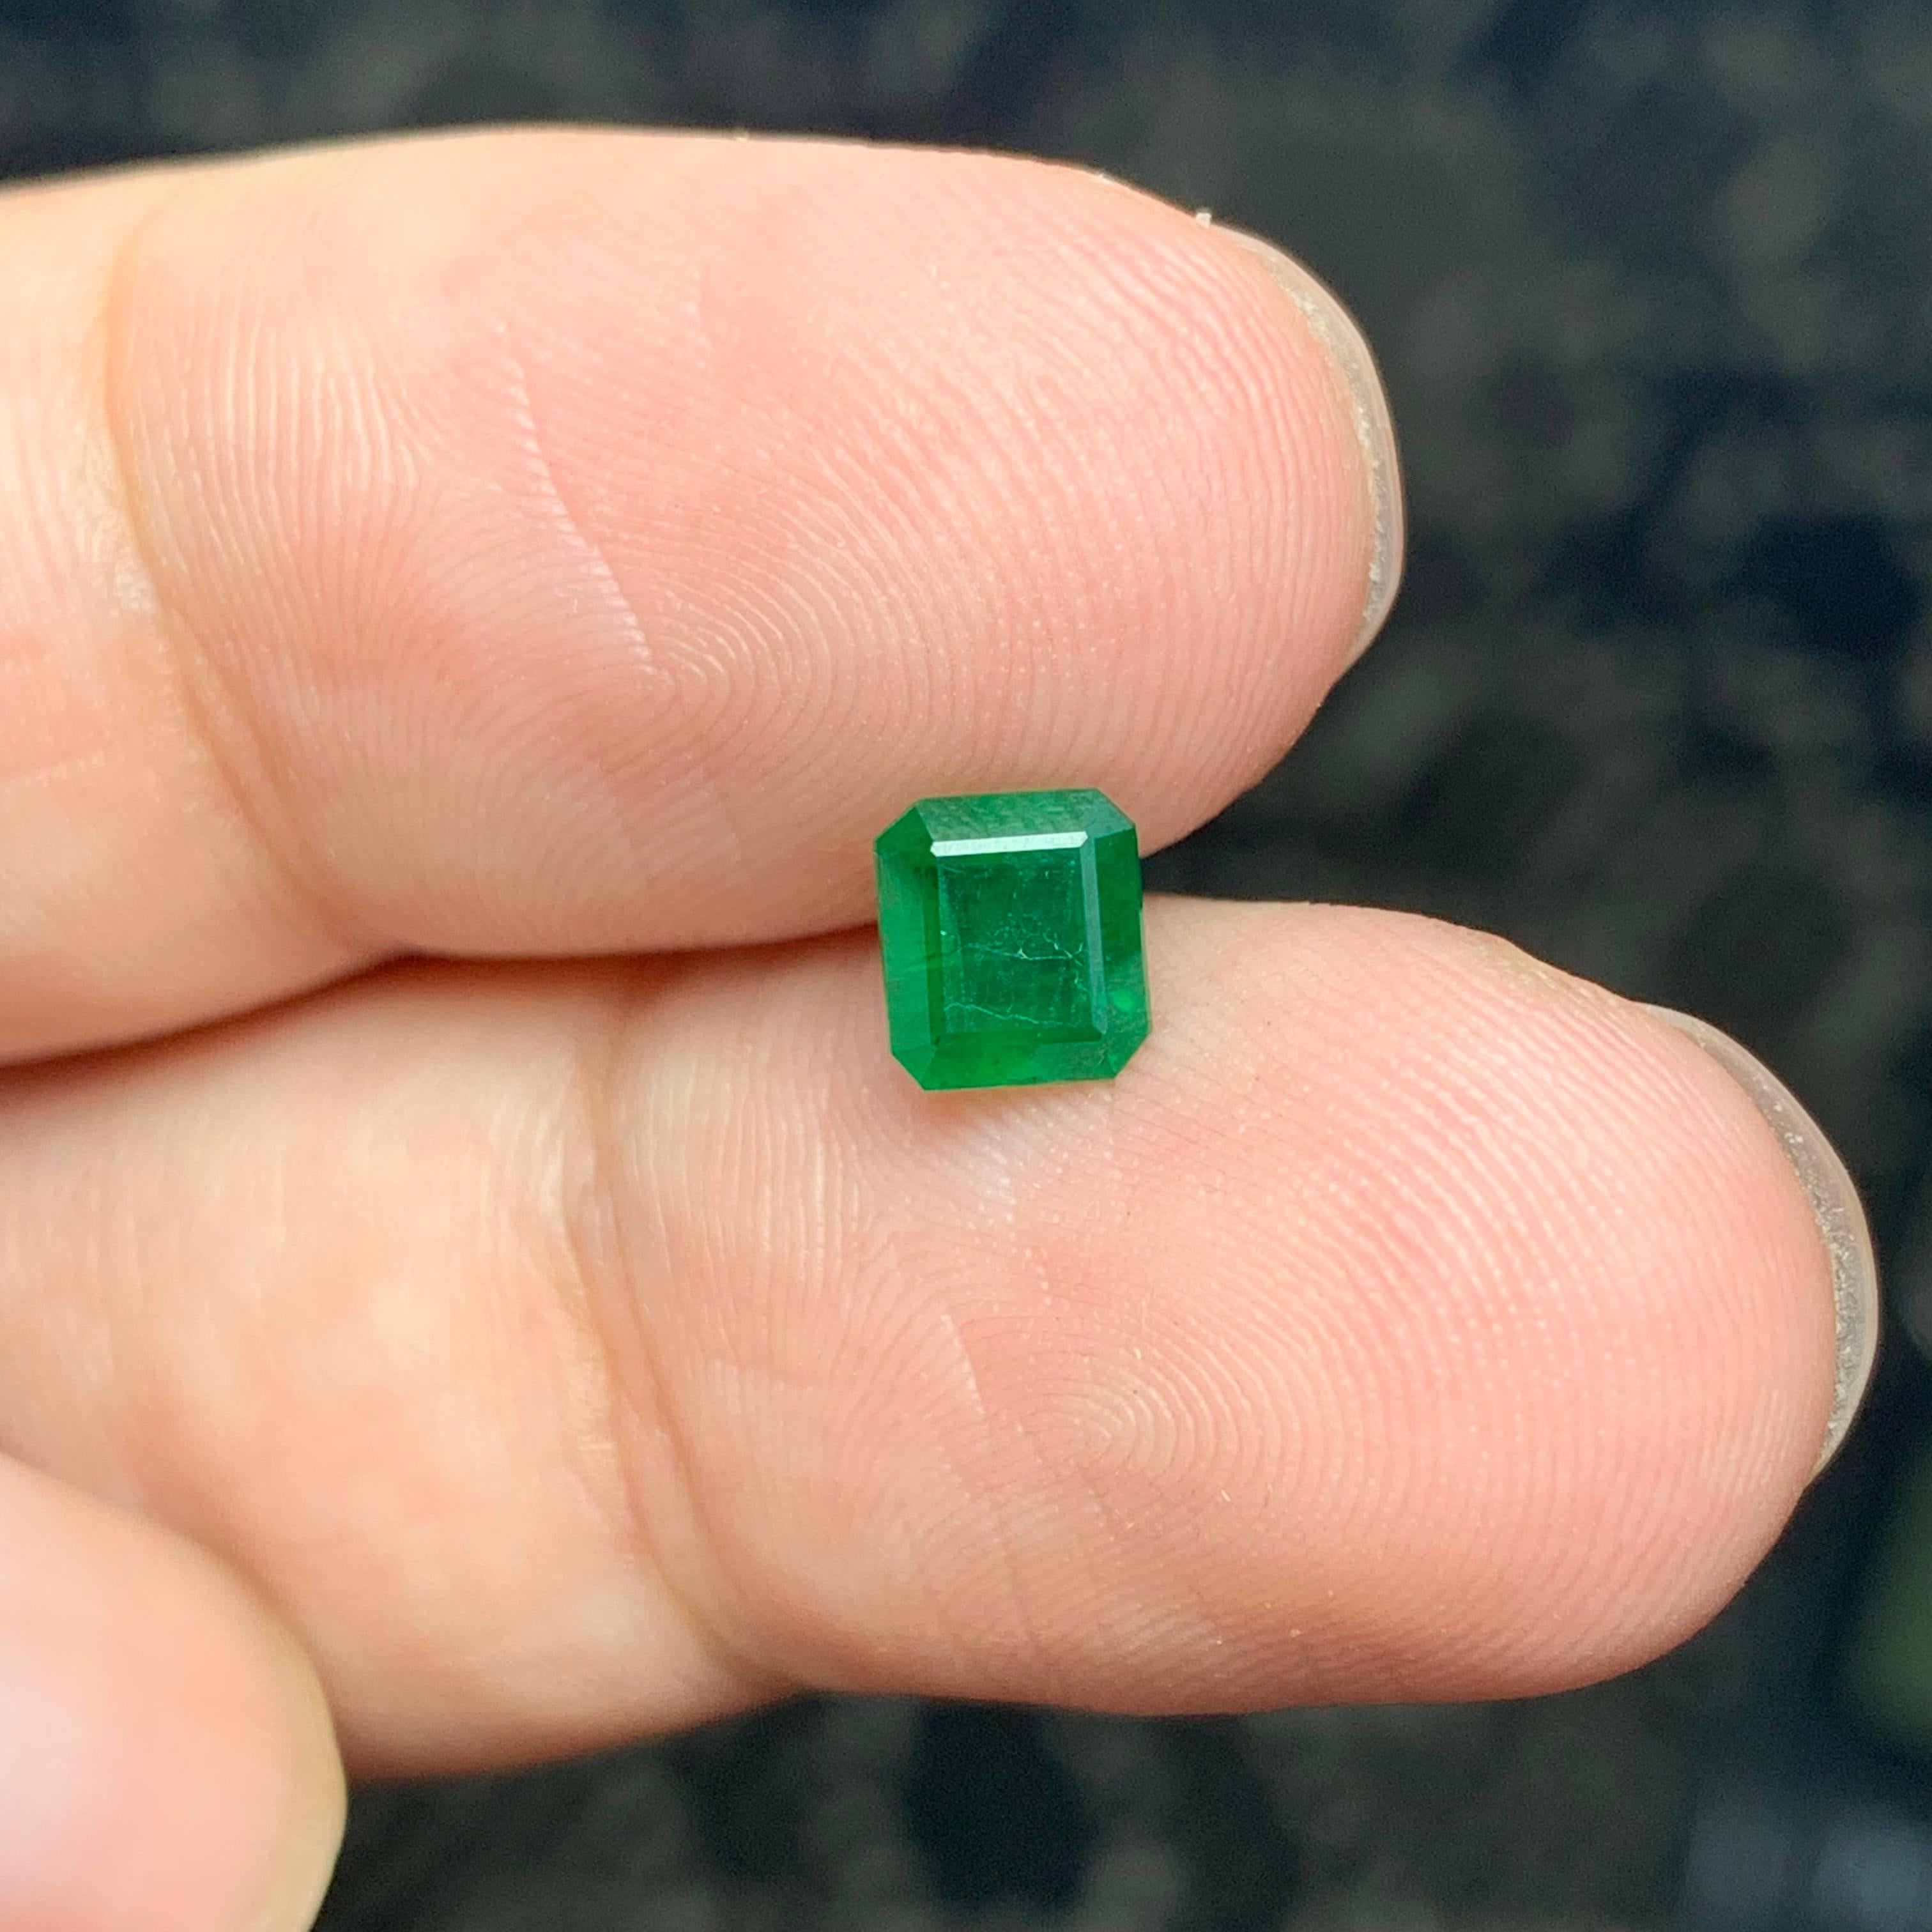 0.85 Carat Natural Loose Emerald Gemstone From Swat Mine, Pakistan  For Sale 2